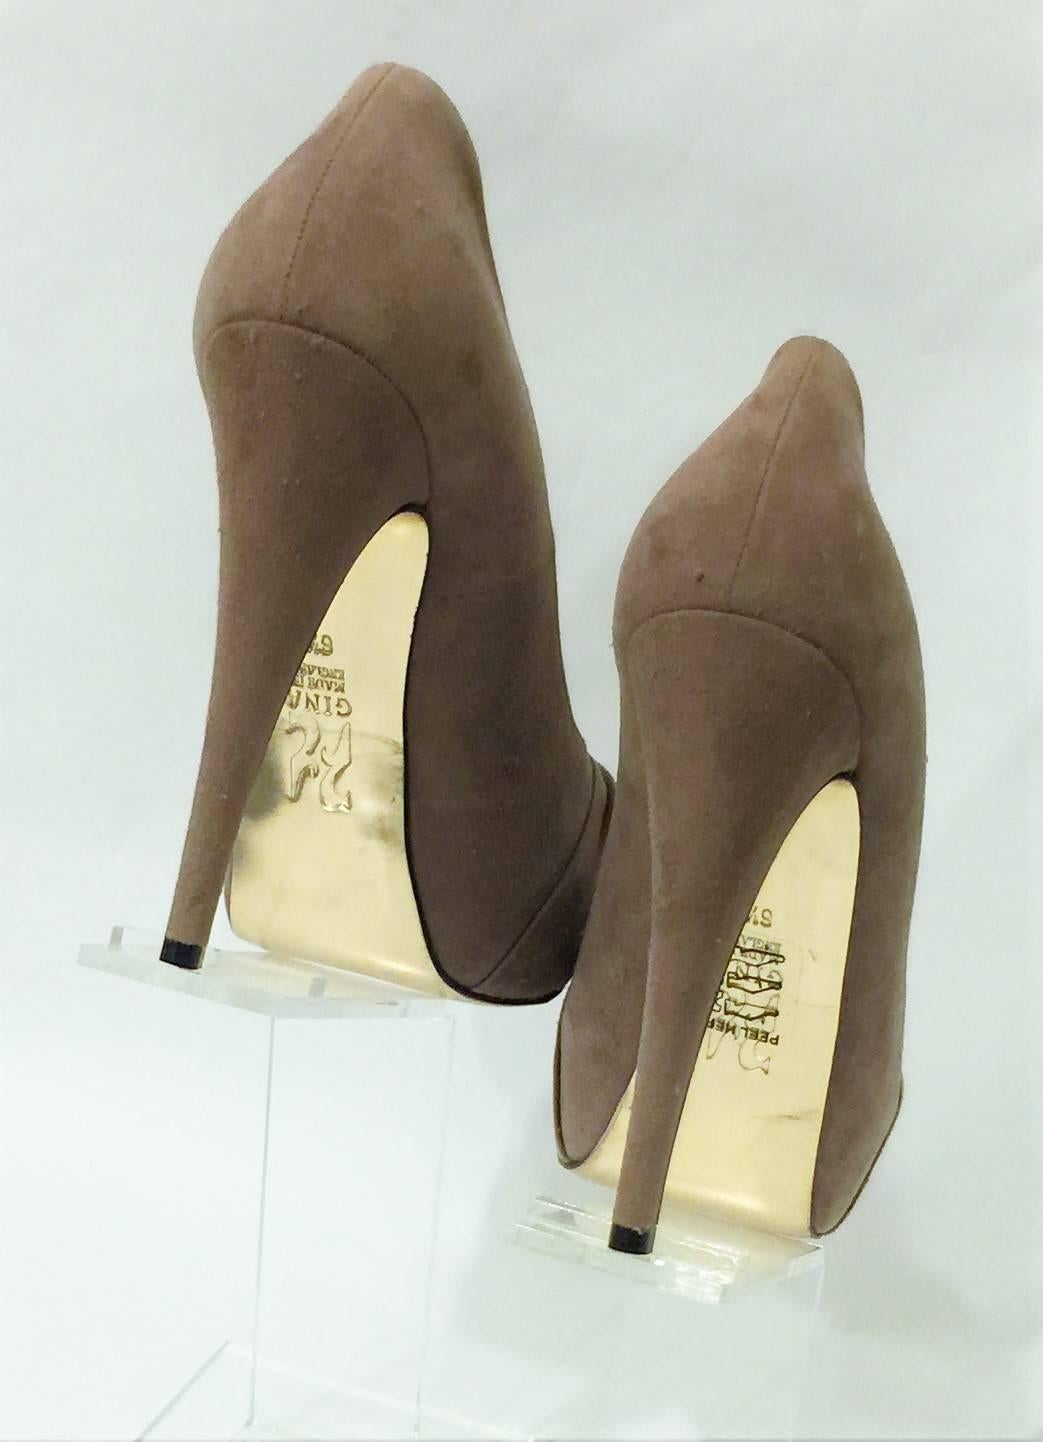 Gina, Contemporary Handmade Shoe.  Gina Taupe Brown ‘Clair’ Suede ‘Hoodie’ Platform Pump.  Made in London, England.  Size 6.5 UK with concealed platform.  Heel is Stiletto 5.2 inches or 14cm.  Material is Suede with leather lining.  Colour Taupe